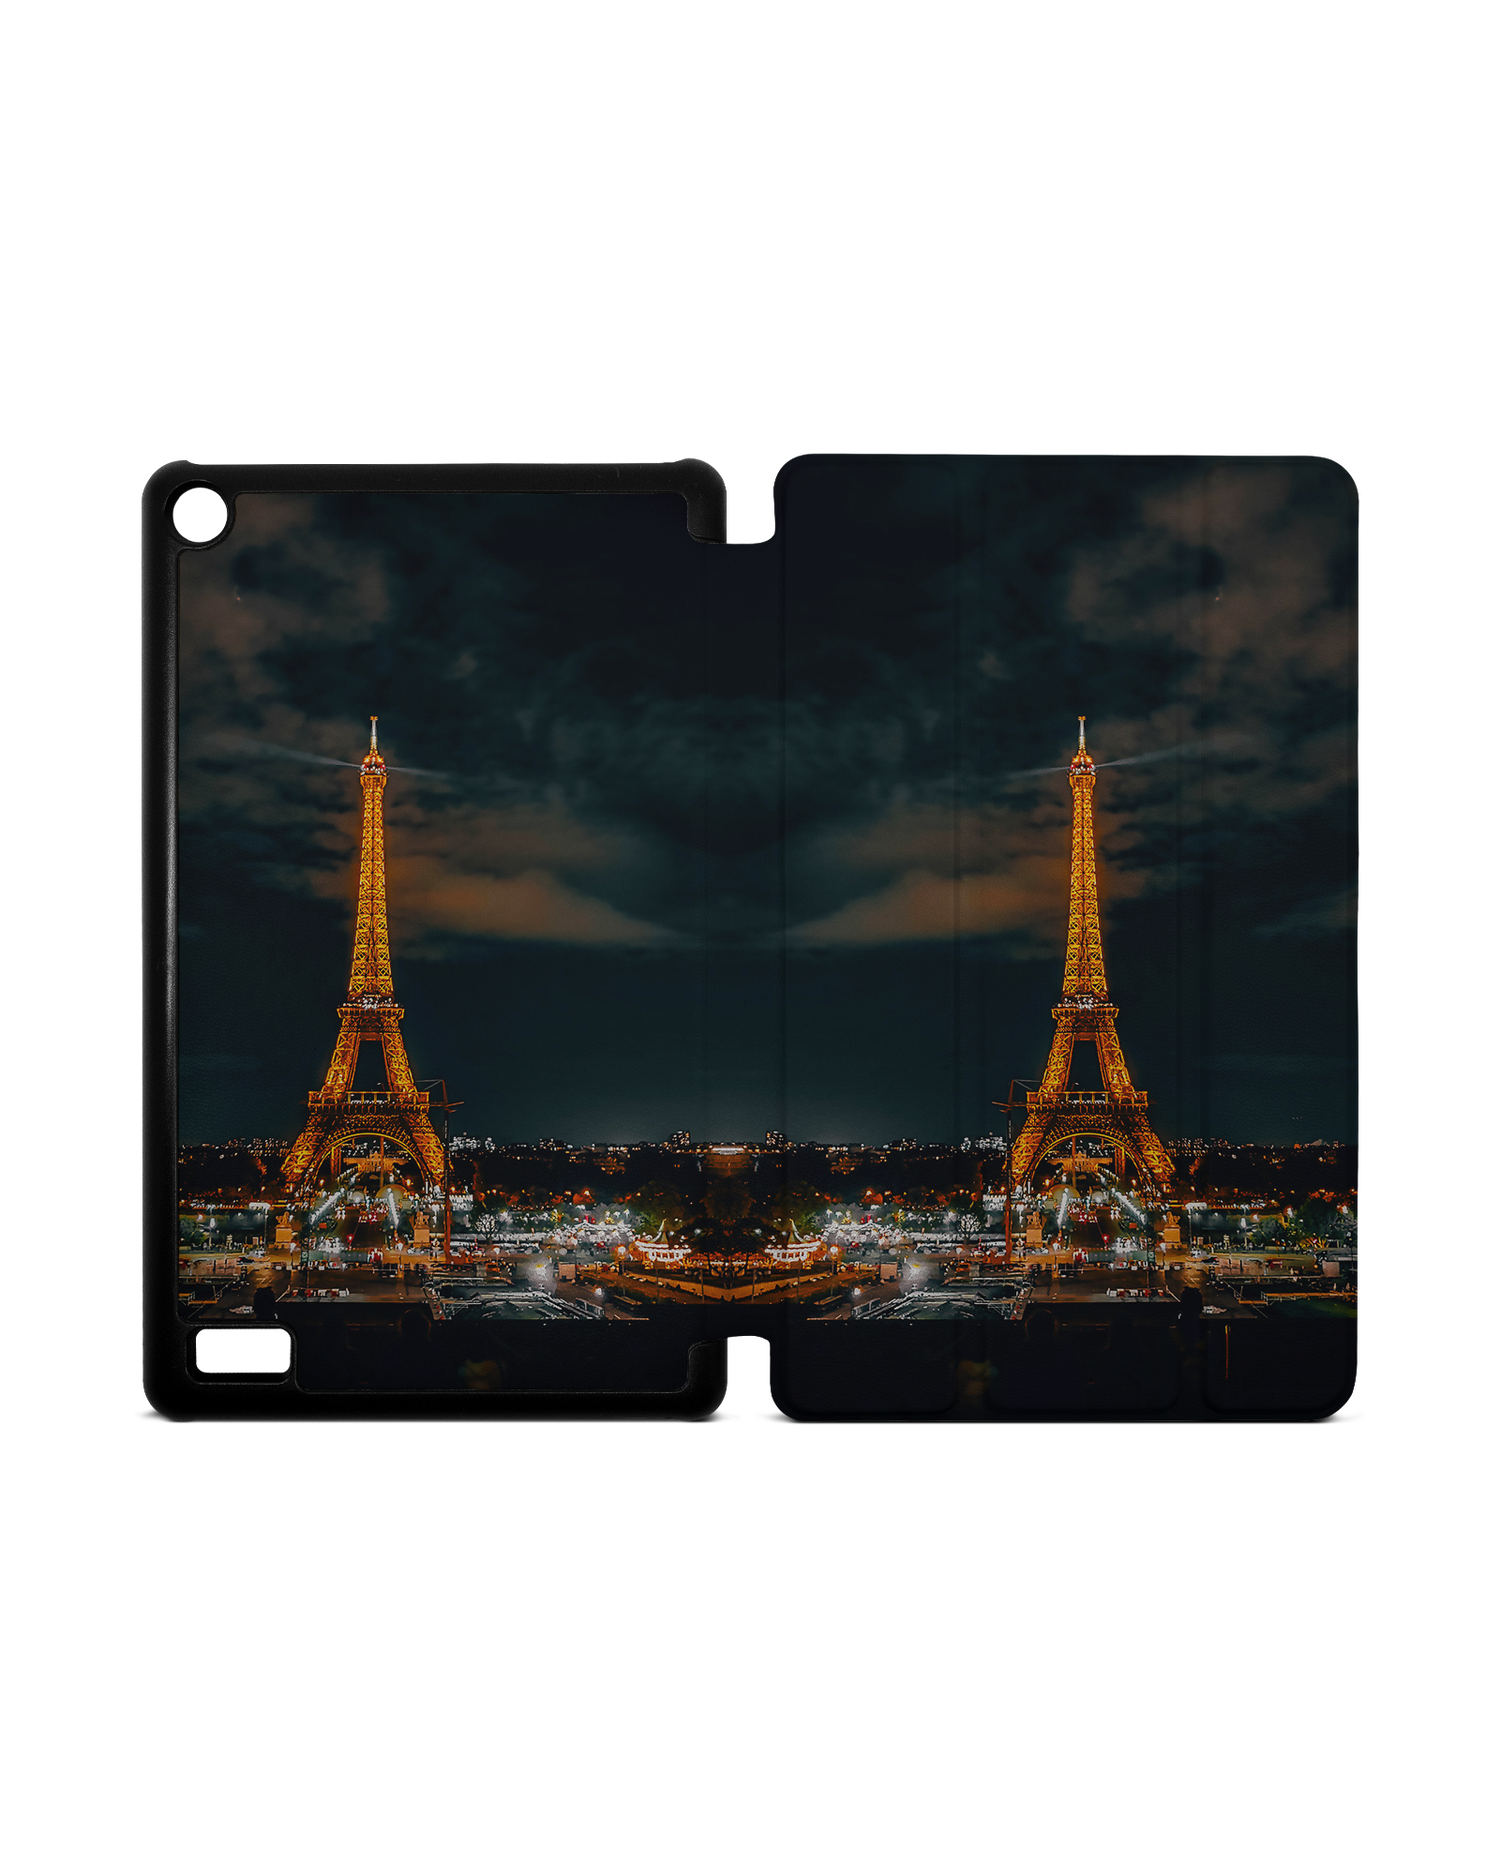 Eiffel Tower By Night Tablet Smart Case for Amazon Fire 7: Opened